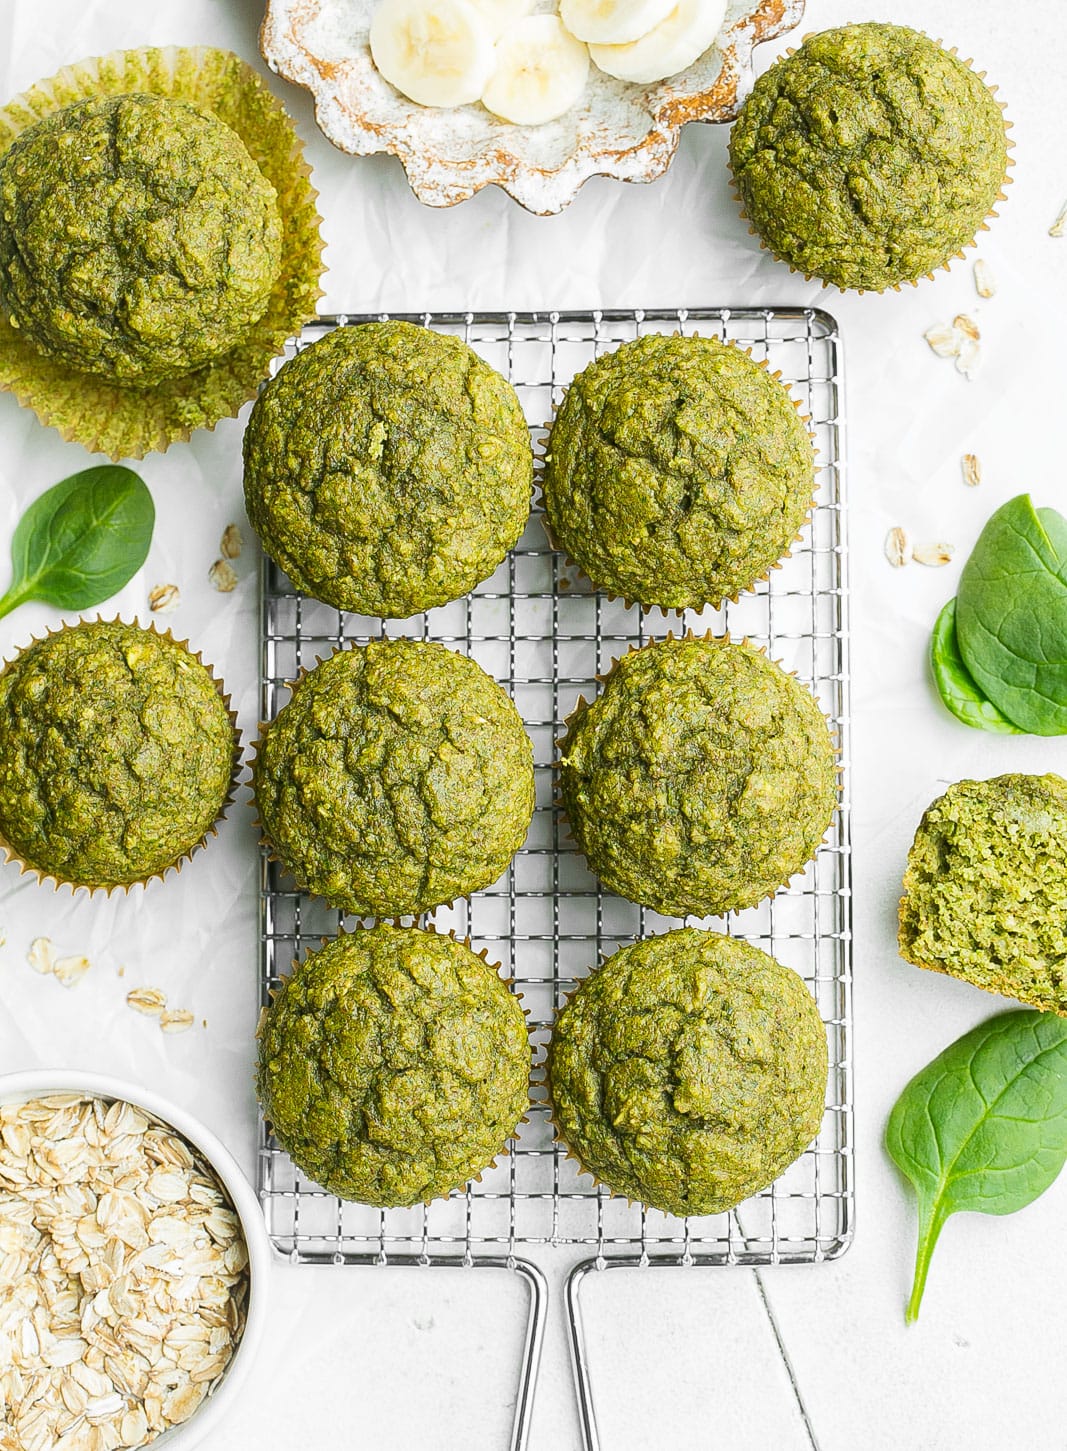 Muffins on a cooling rack with spinach and oats.